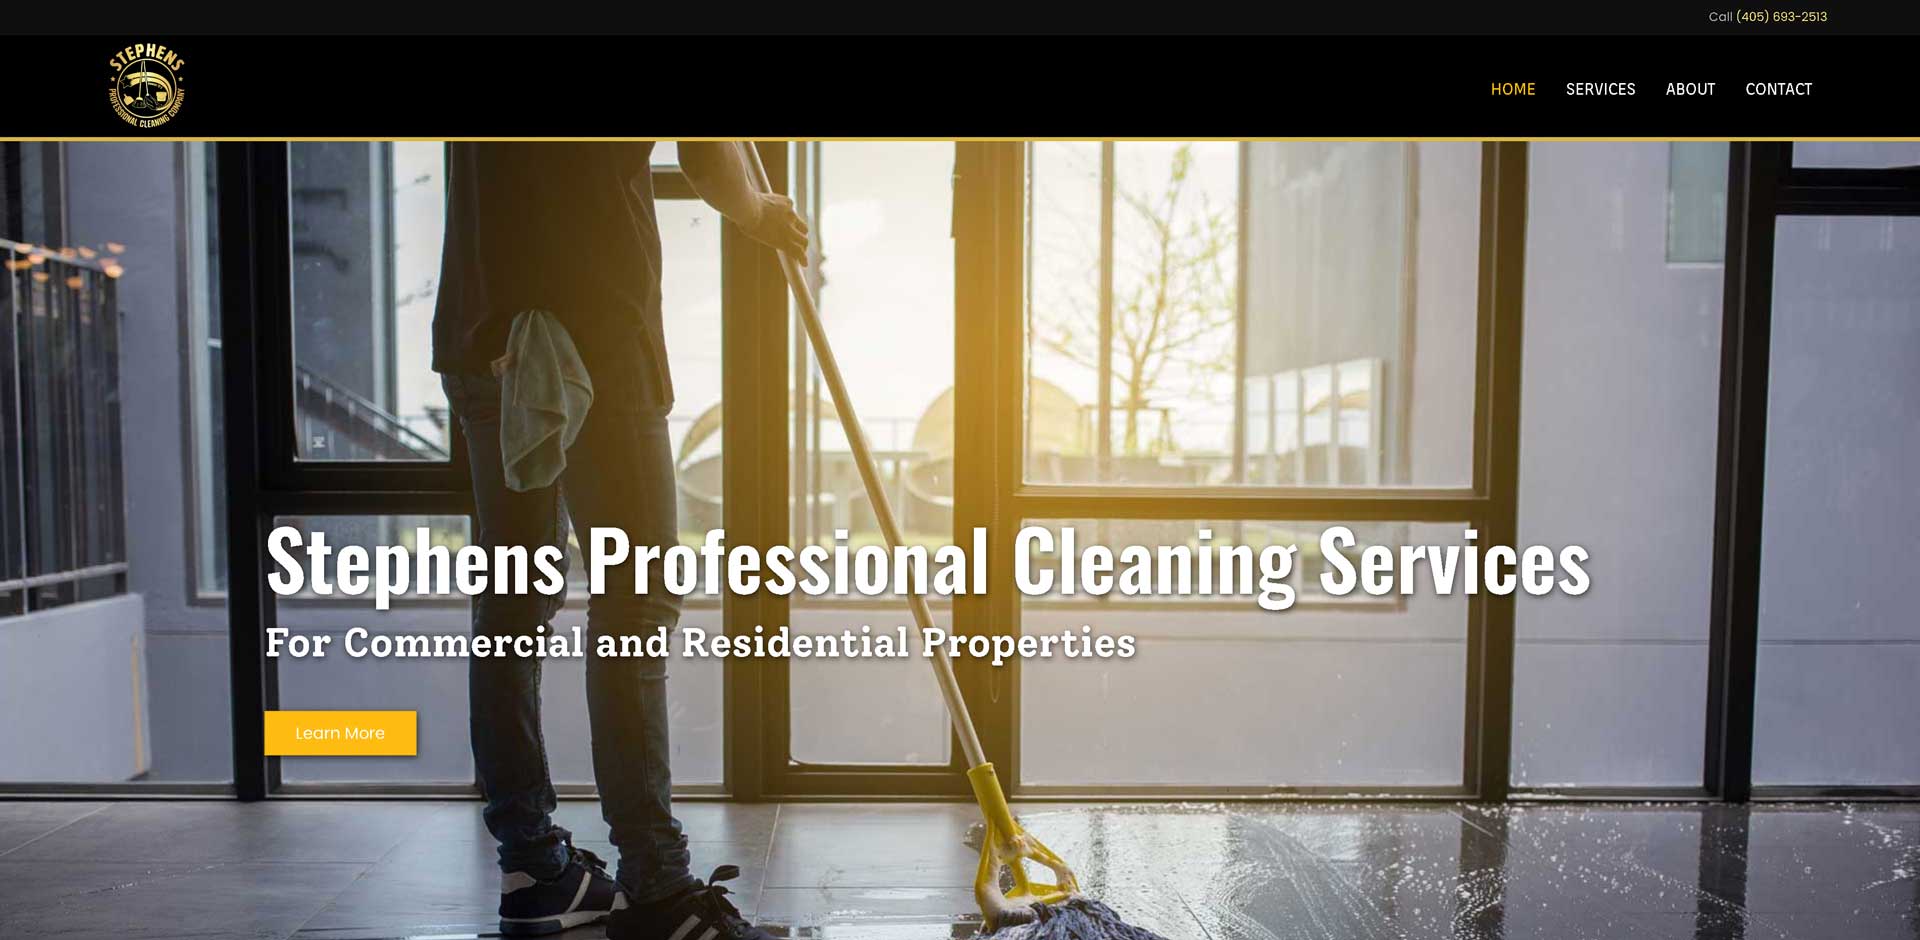 Stephens Professional Cleaning Services